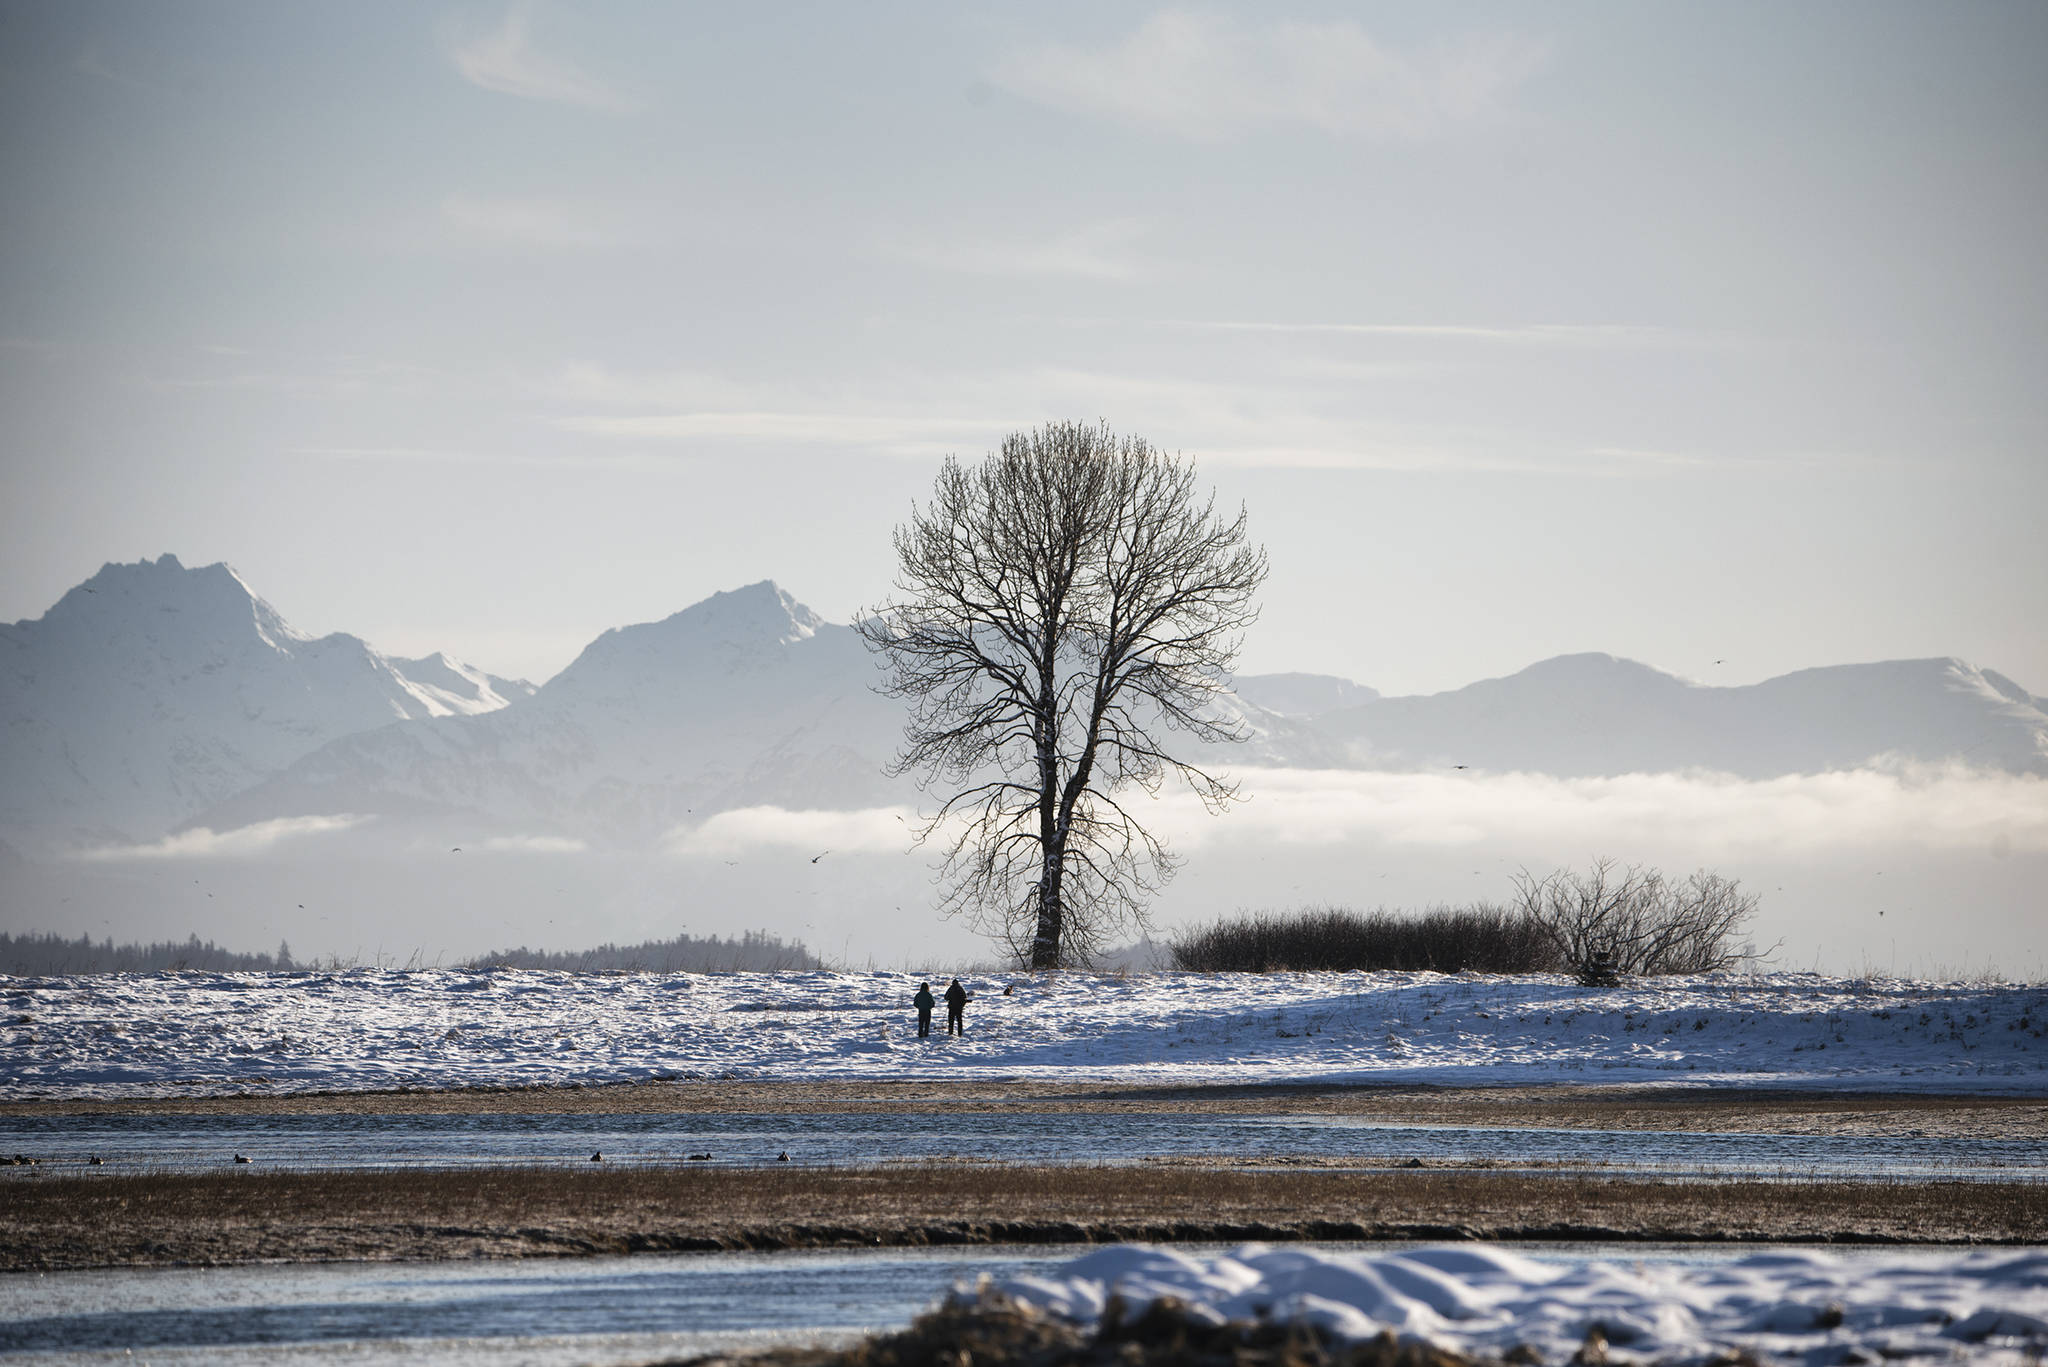 One tree stands alone with the Chilkat Range in the background on Jan. 31, 2021. (Courtesy Photo / Kenneth Gill, gillfoto)